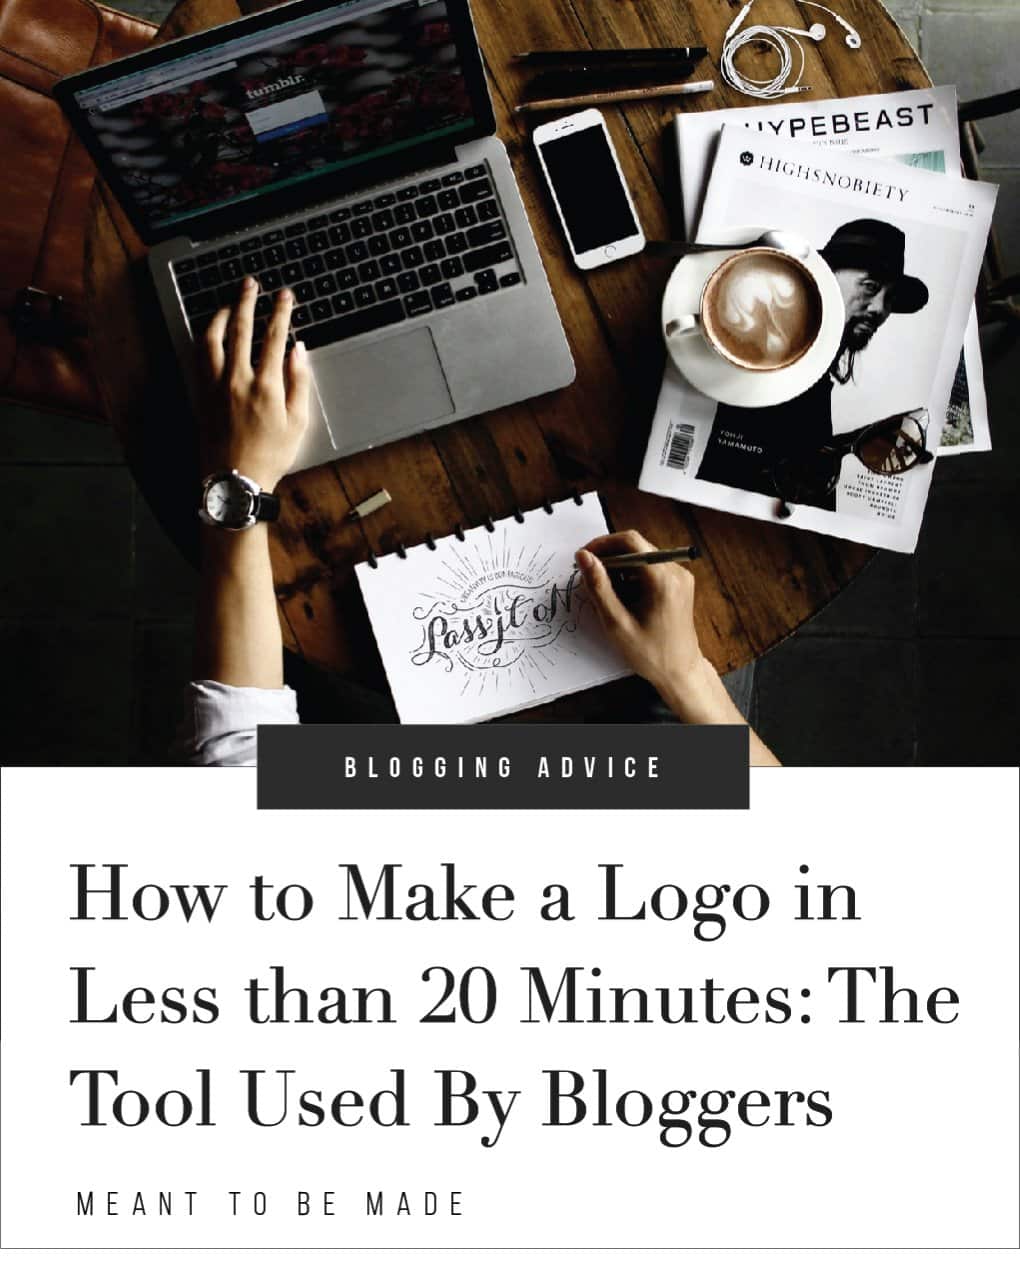 How to Make a Logo in Less than 20 Minutes: The Tool Used By Bloggers